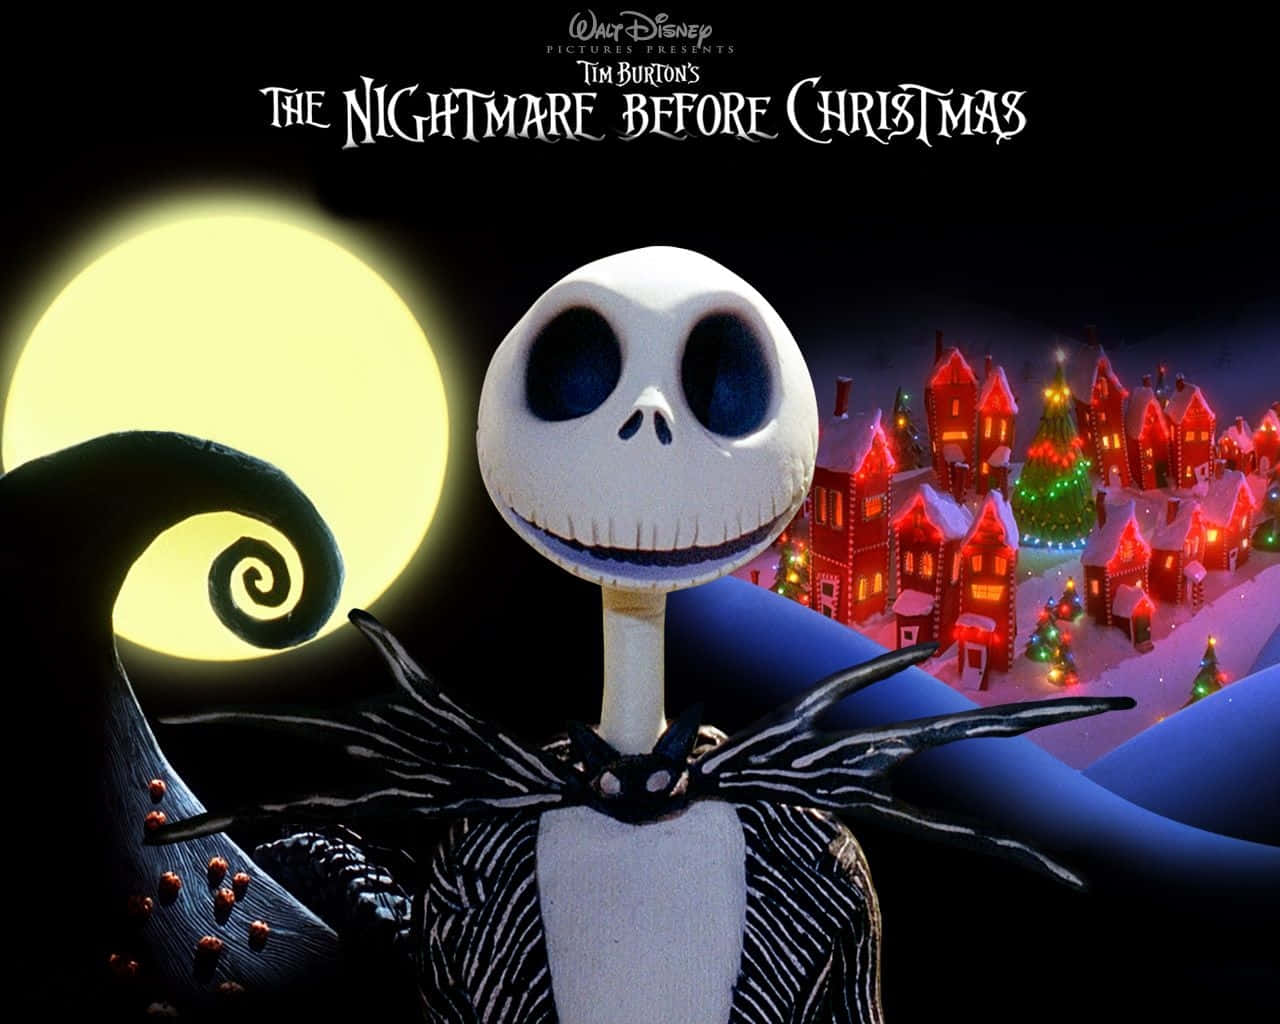 "Sally shows her innocence and resolve in The Nightmare Before Christmas." Wallpaper